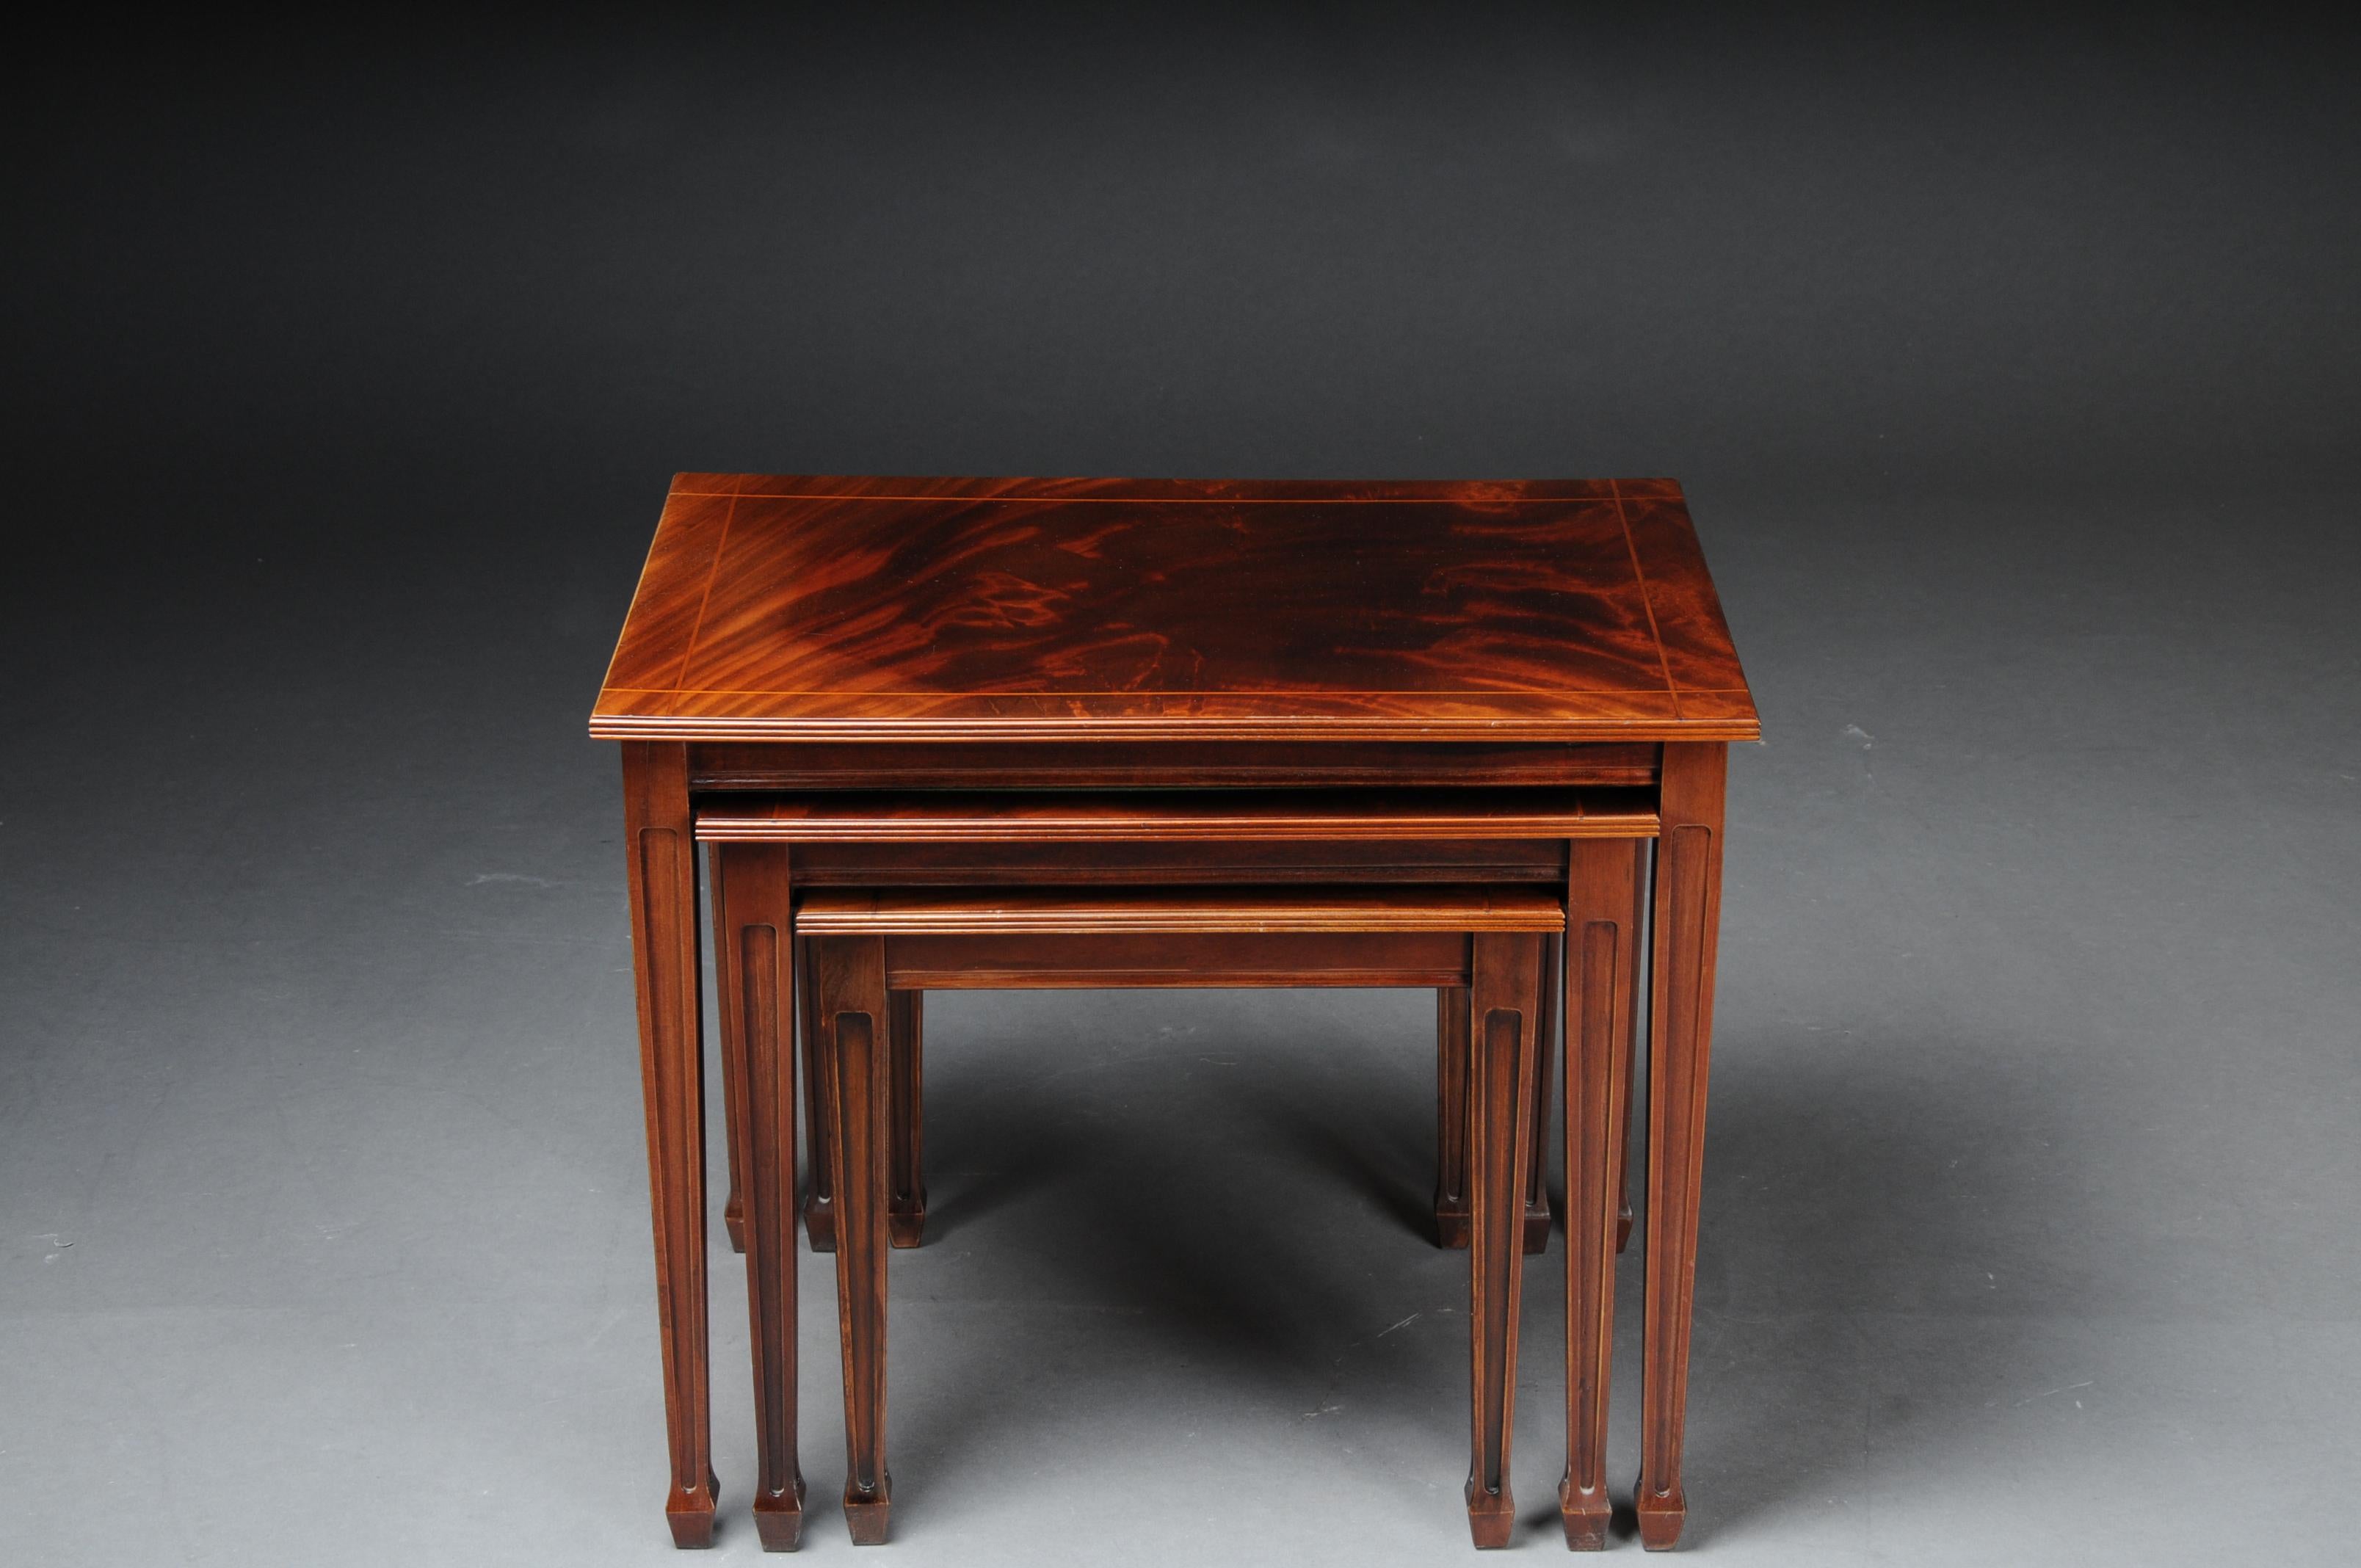 20th century English set of 3 side tables, mahogany

Solid wood, mahogany veneered and stained. Slightly protruding cover plate standing on fluted square legs.

(G-87).